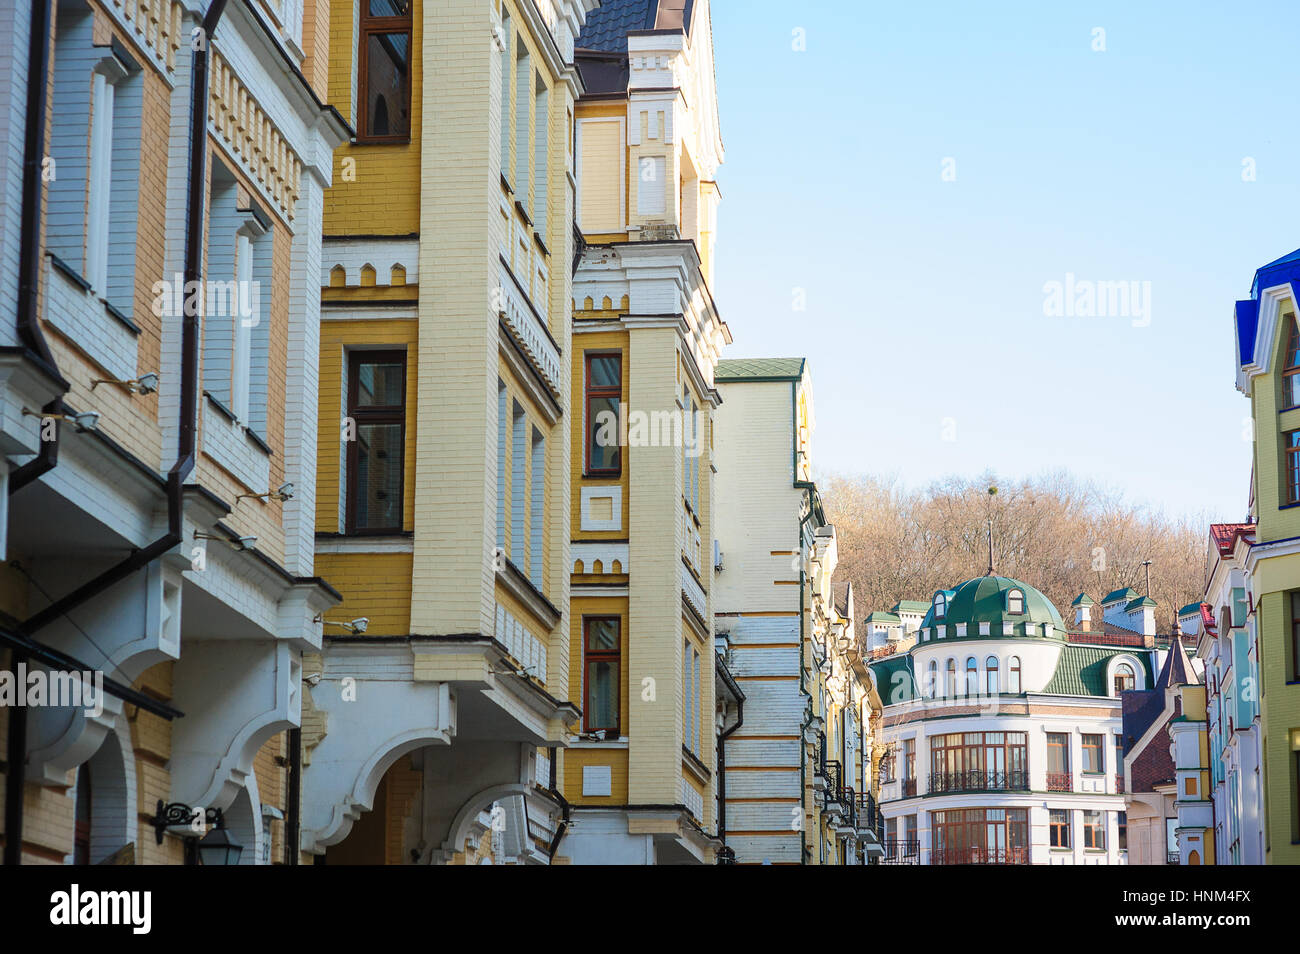 ancient architectural building with balconies Stock Photo